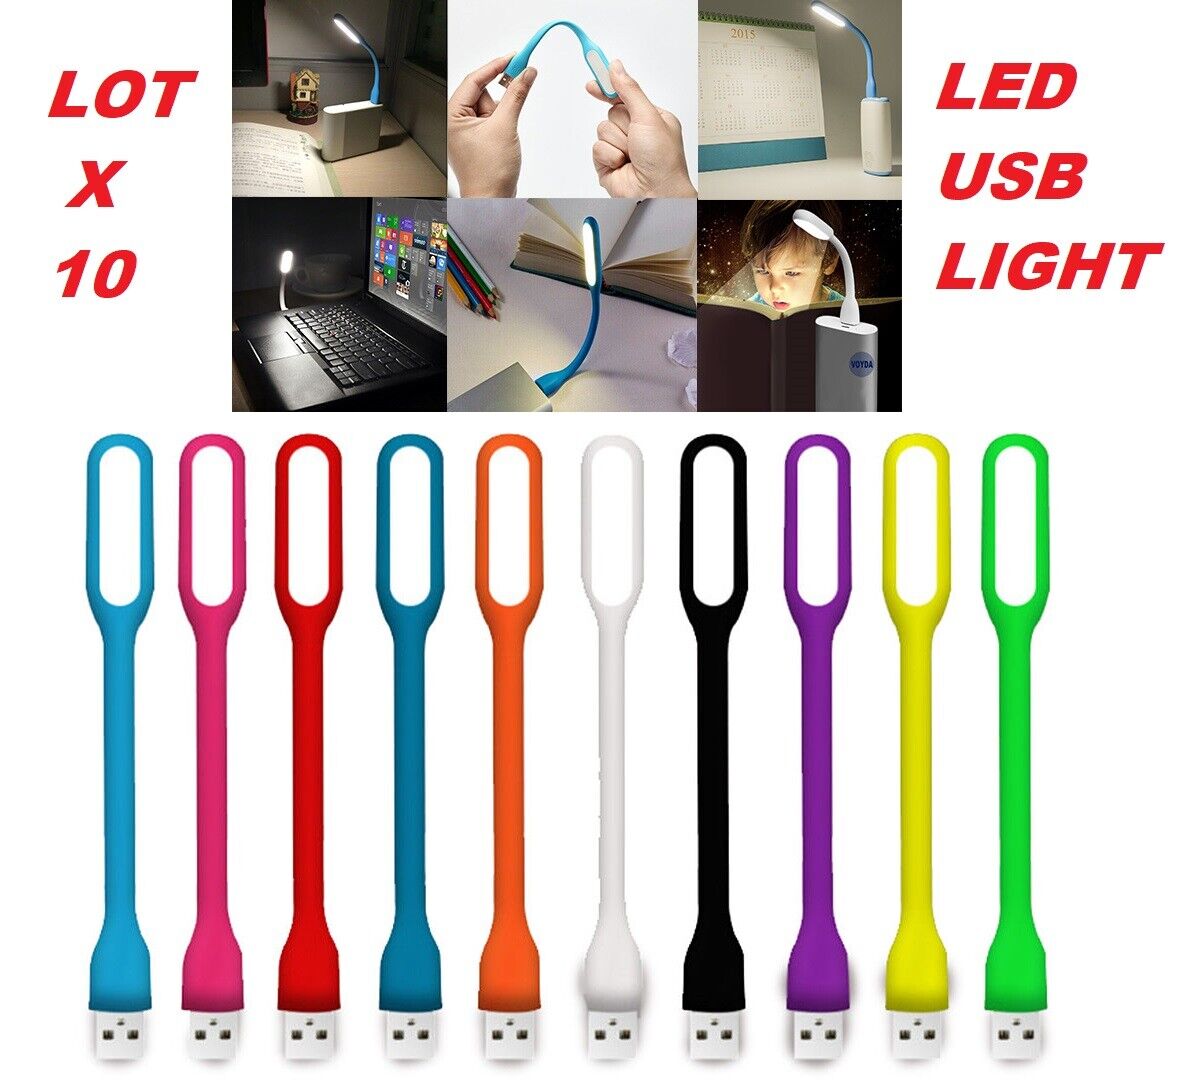 new lot 10 USB LED Light Lamp for Computer Keyboard Laptop Notebook power bank 